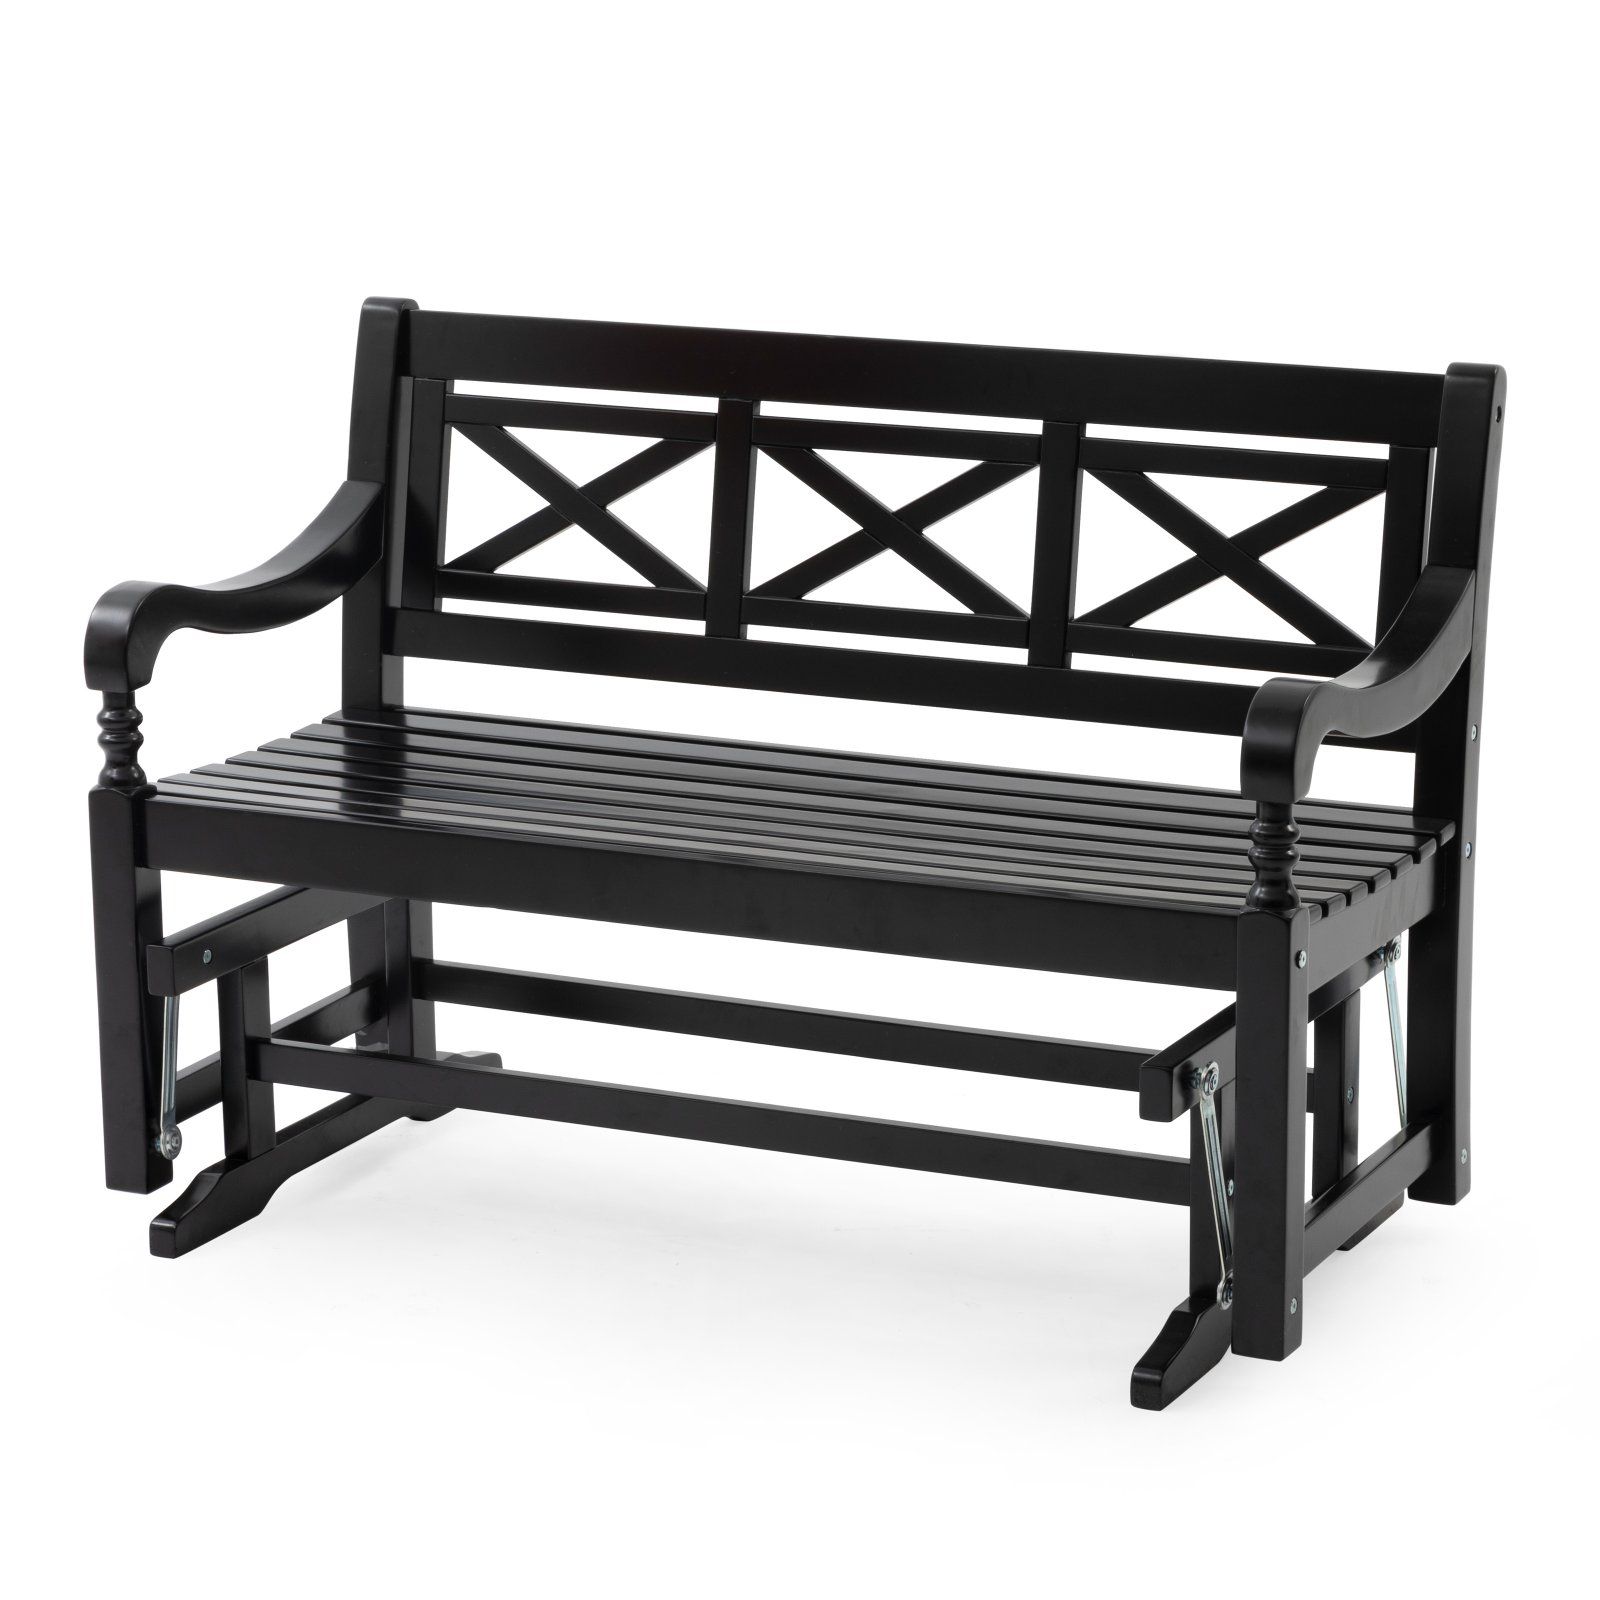 Favorite Black Outdoor Durable Steel Frame Patio Swing Glider Bench Chairs Intended For Belham Living Holland 4 Ft (View 11 of 25)